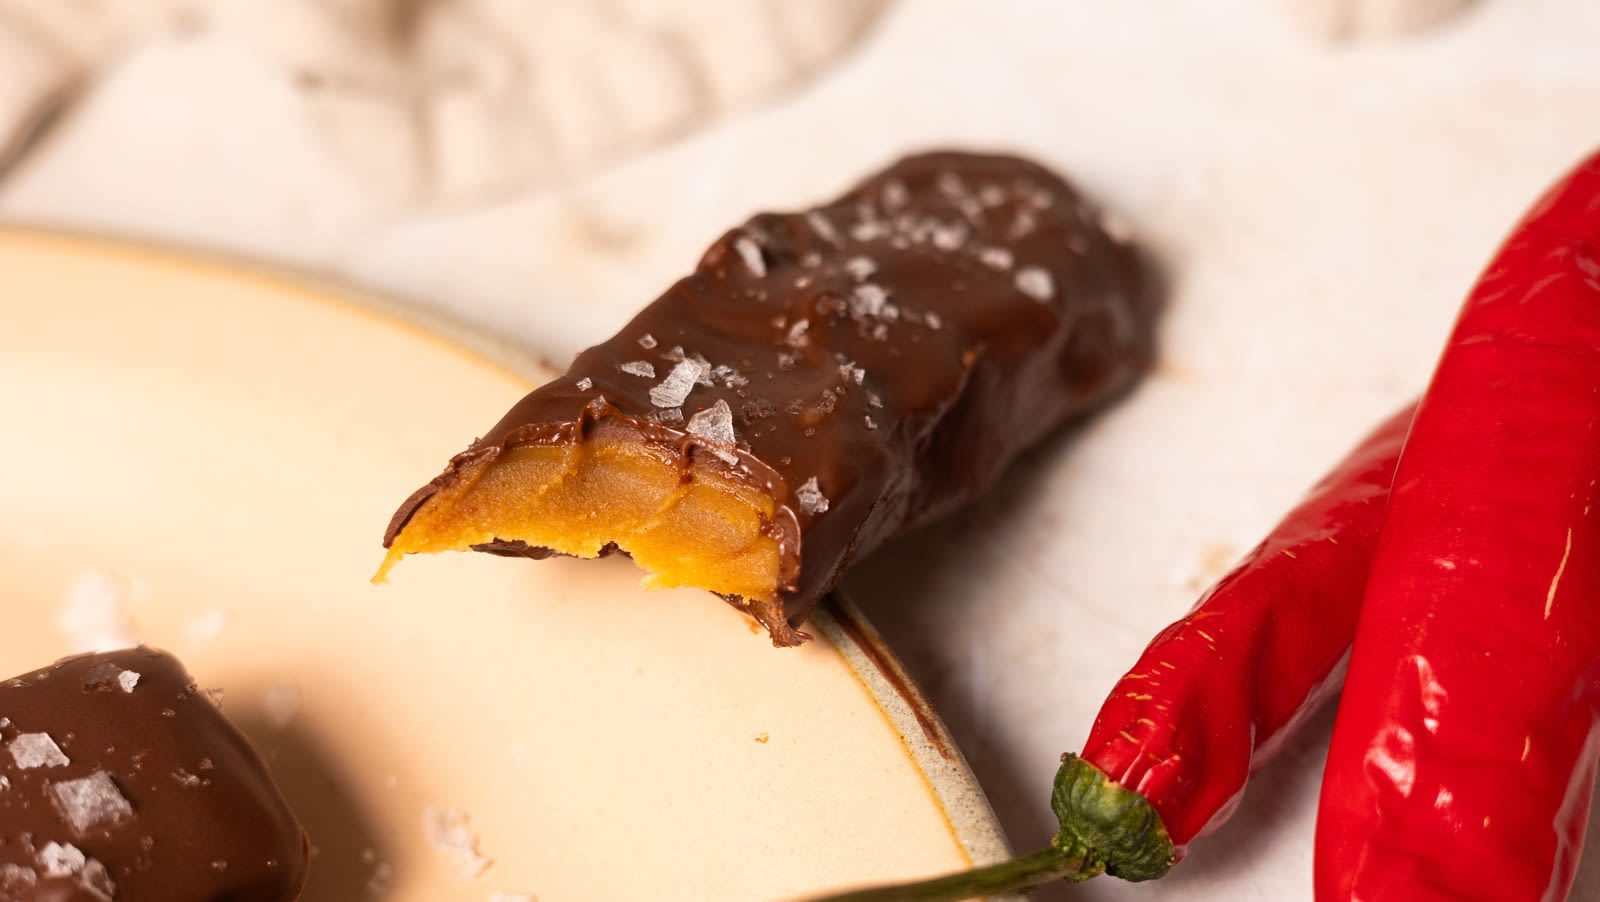 Brown Butter And Chile-Stuffed Chocolate Bars Recipe